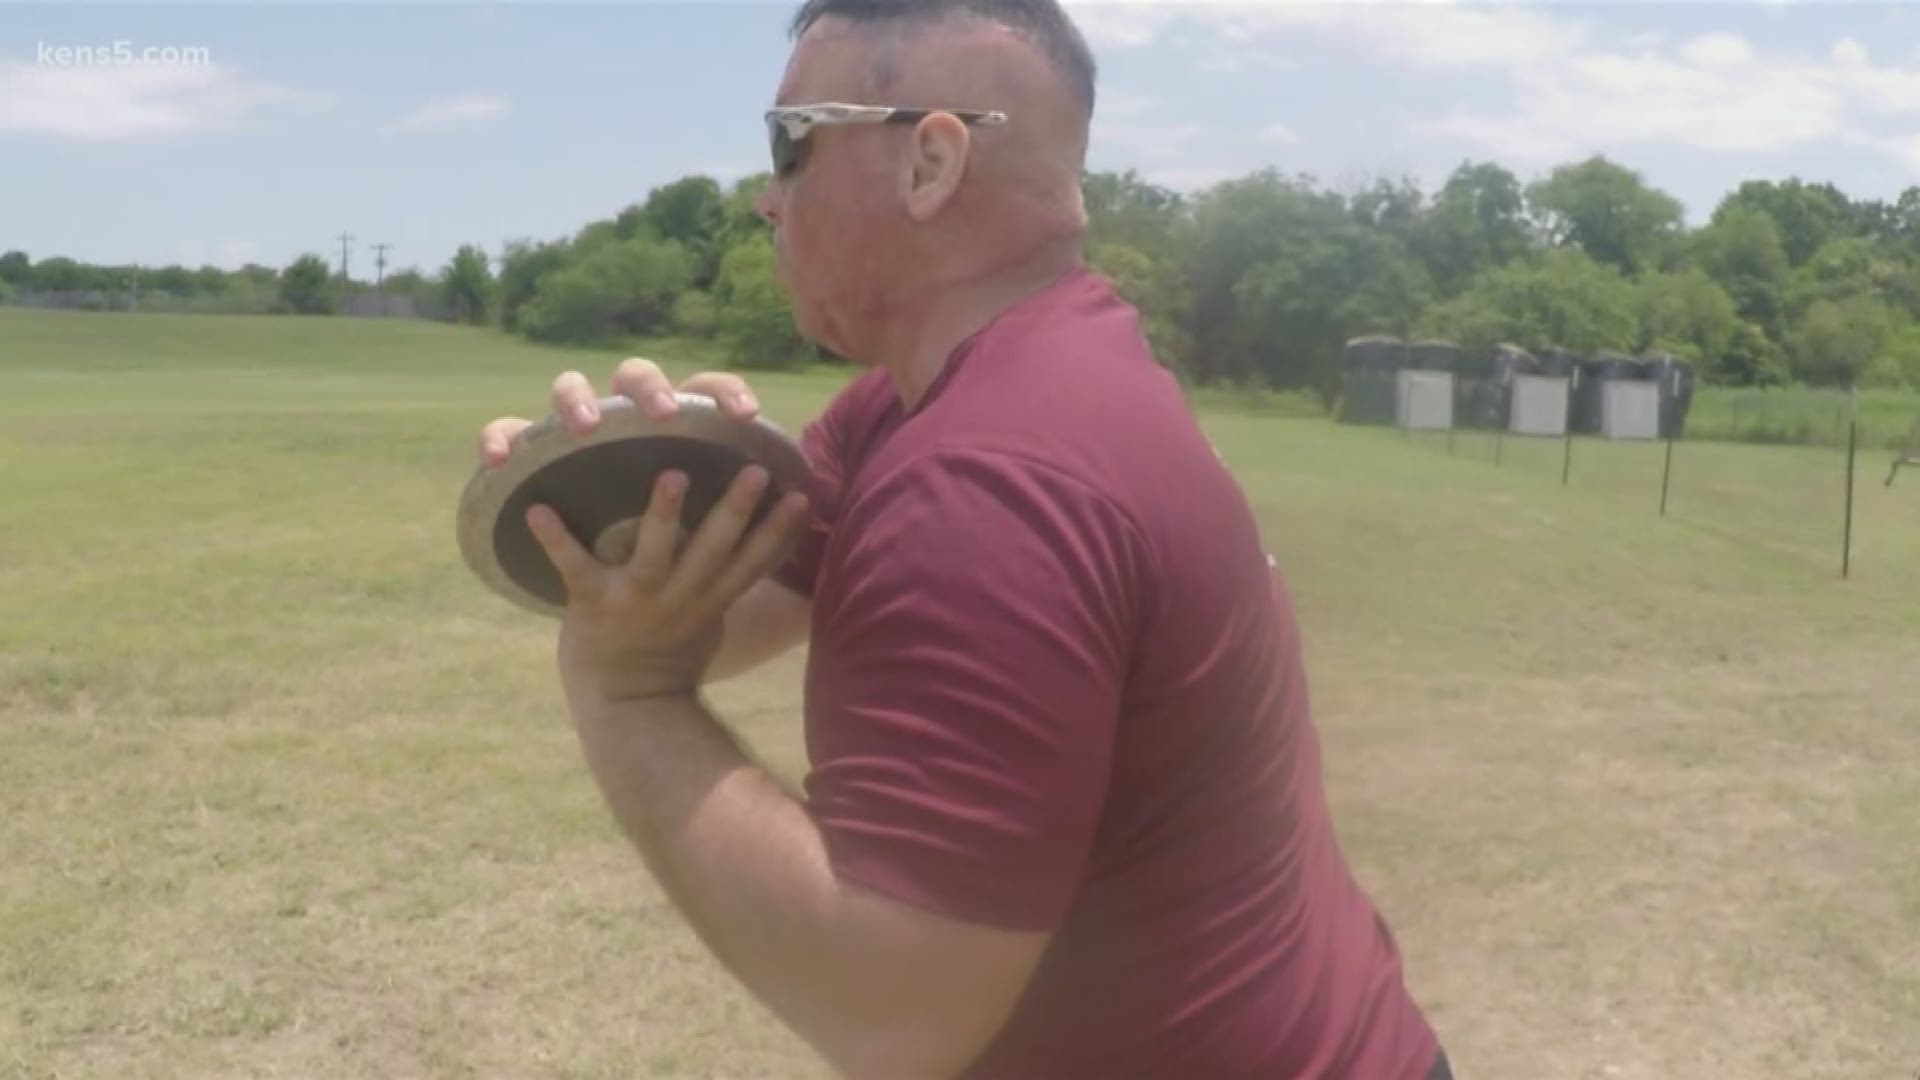 Two San Antonio marines are gearing up for a grueling competition against hundreds nationwide.